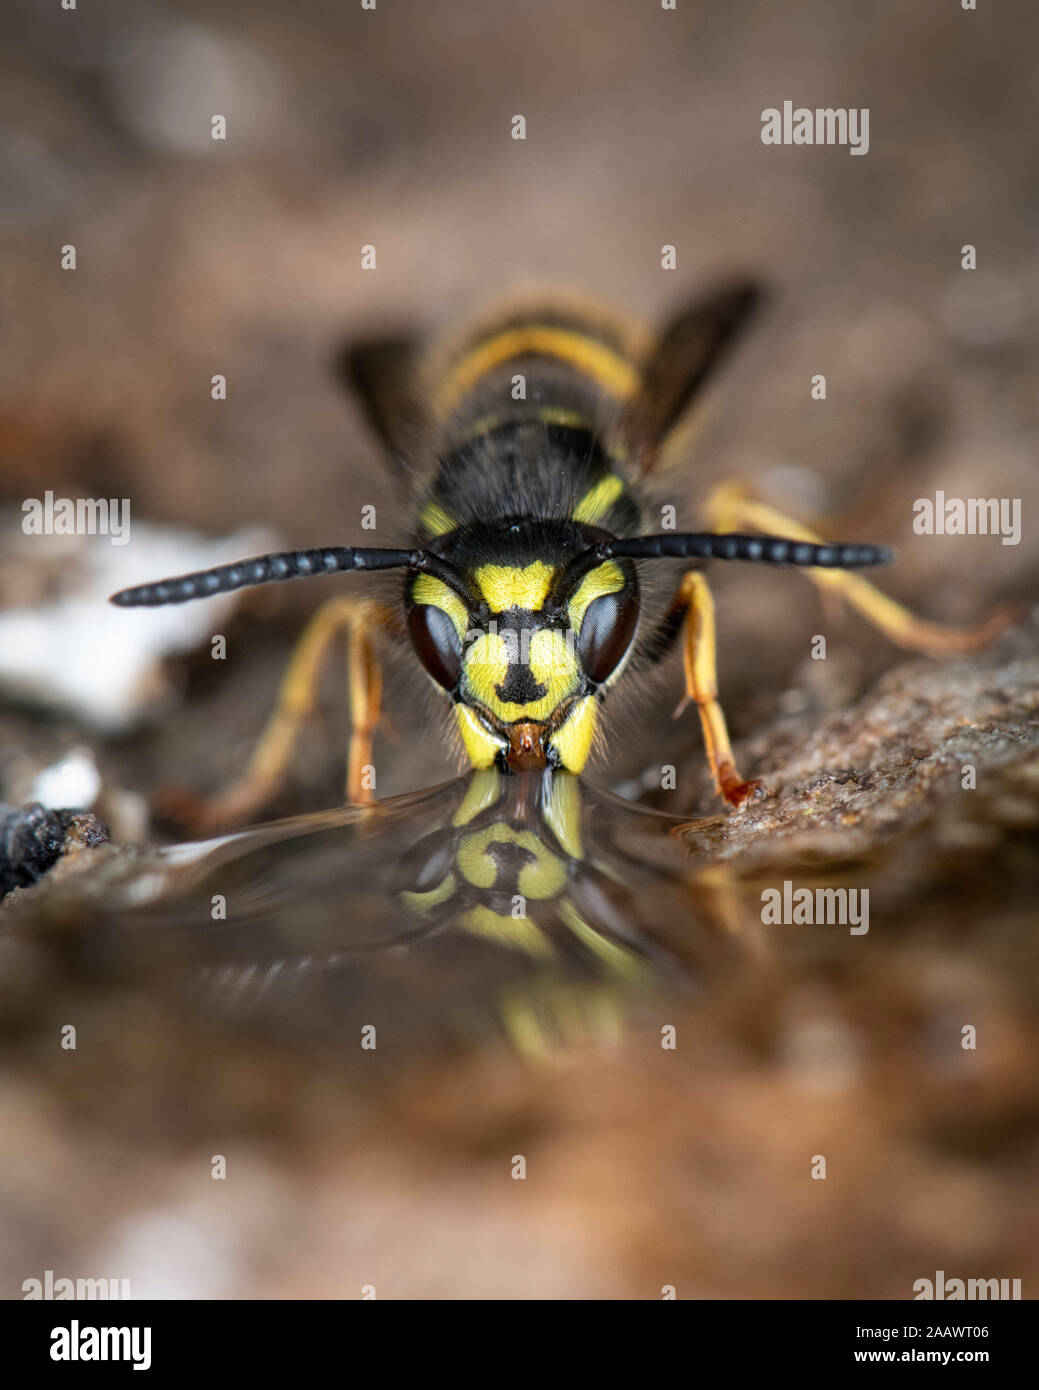 Close-up of common wasp on rock Banque D'Images